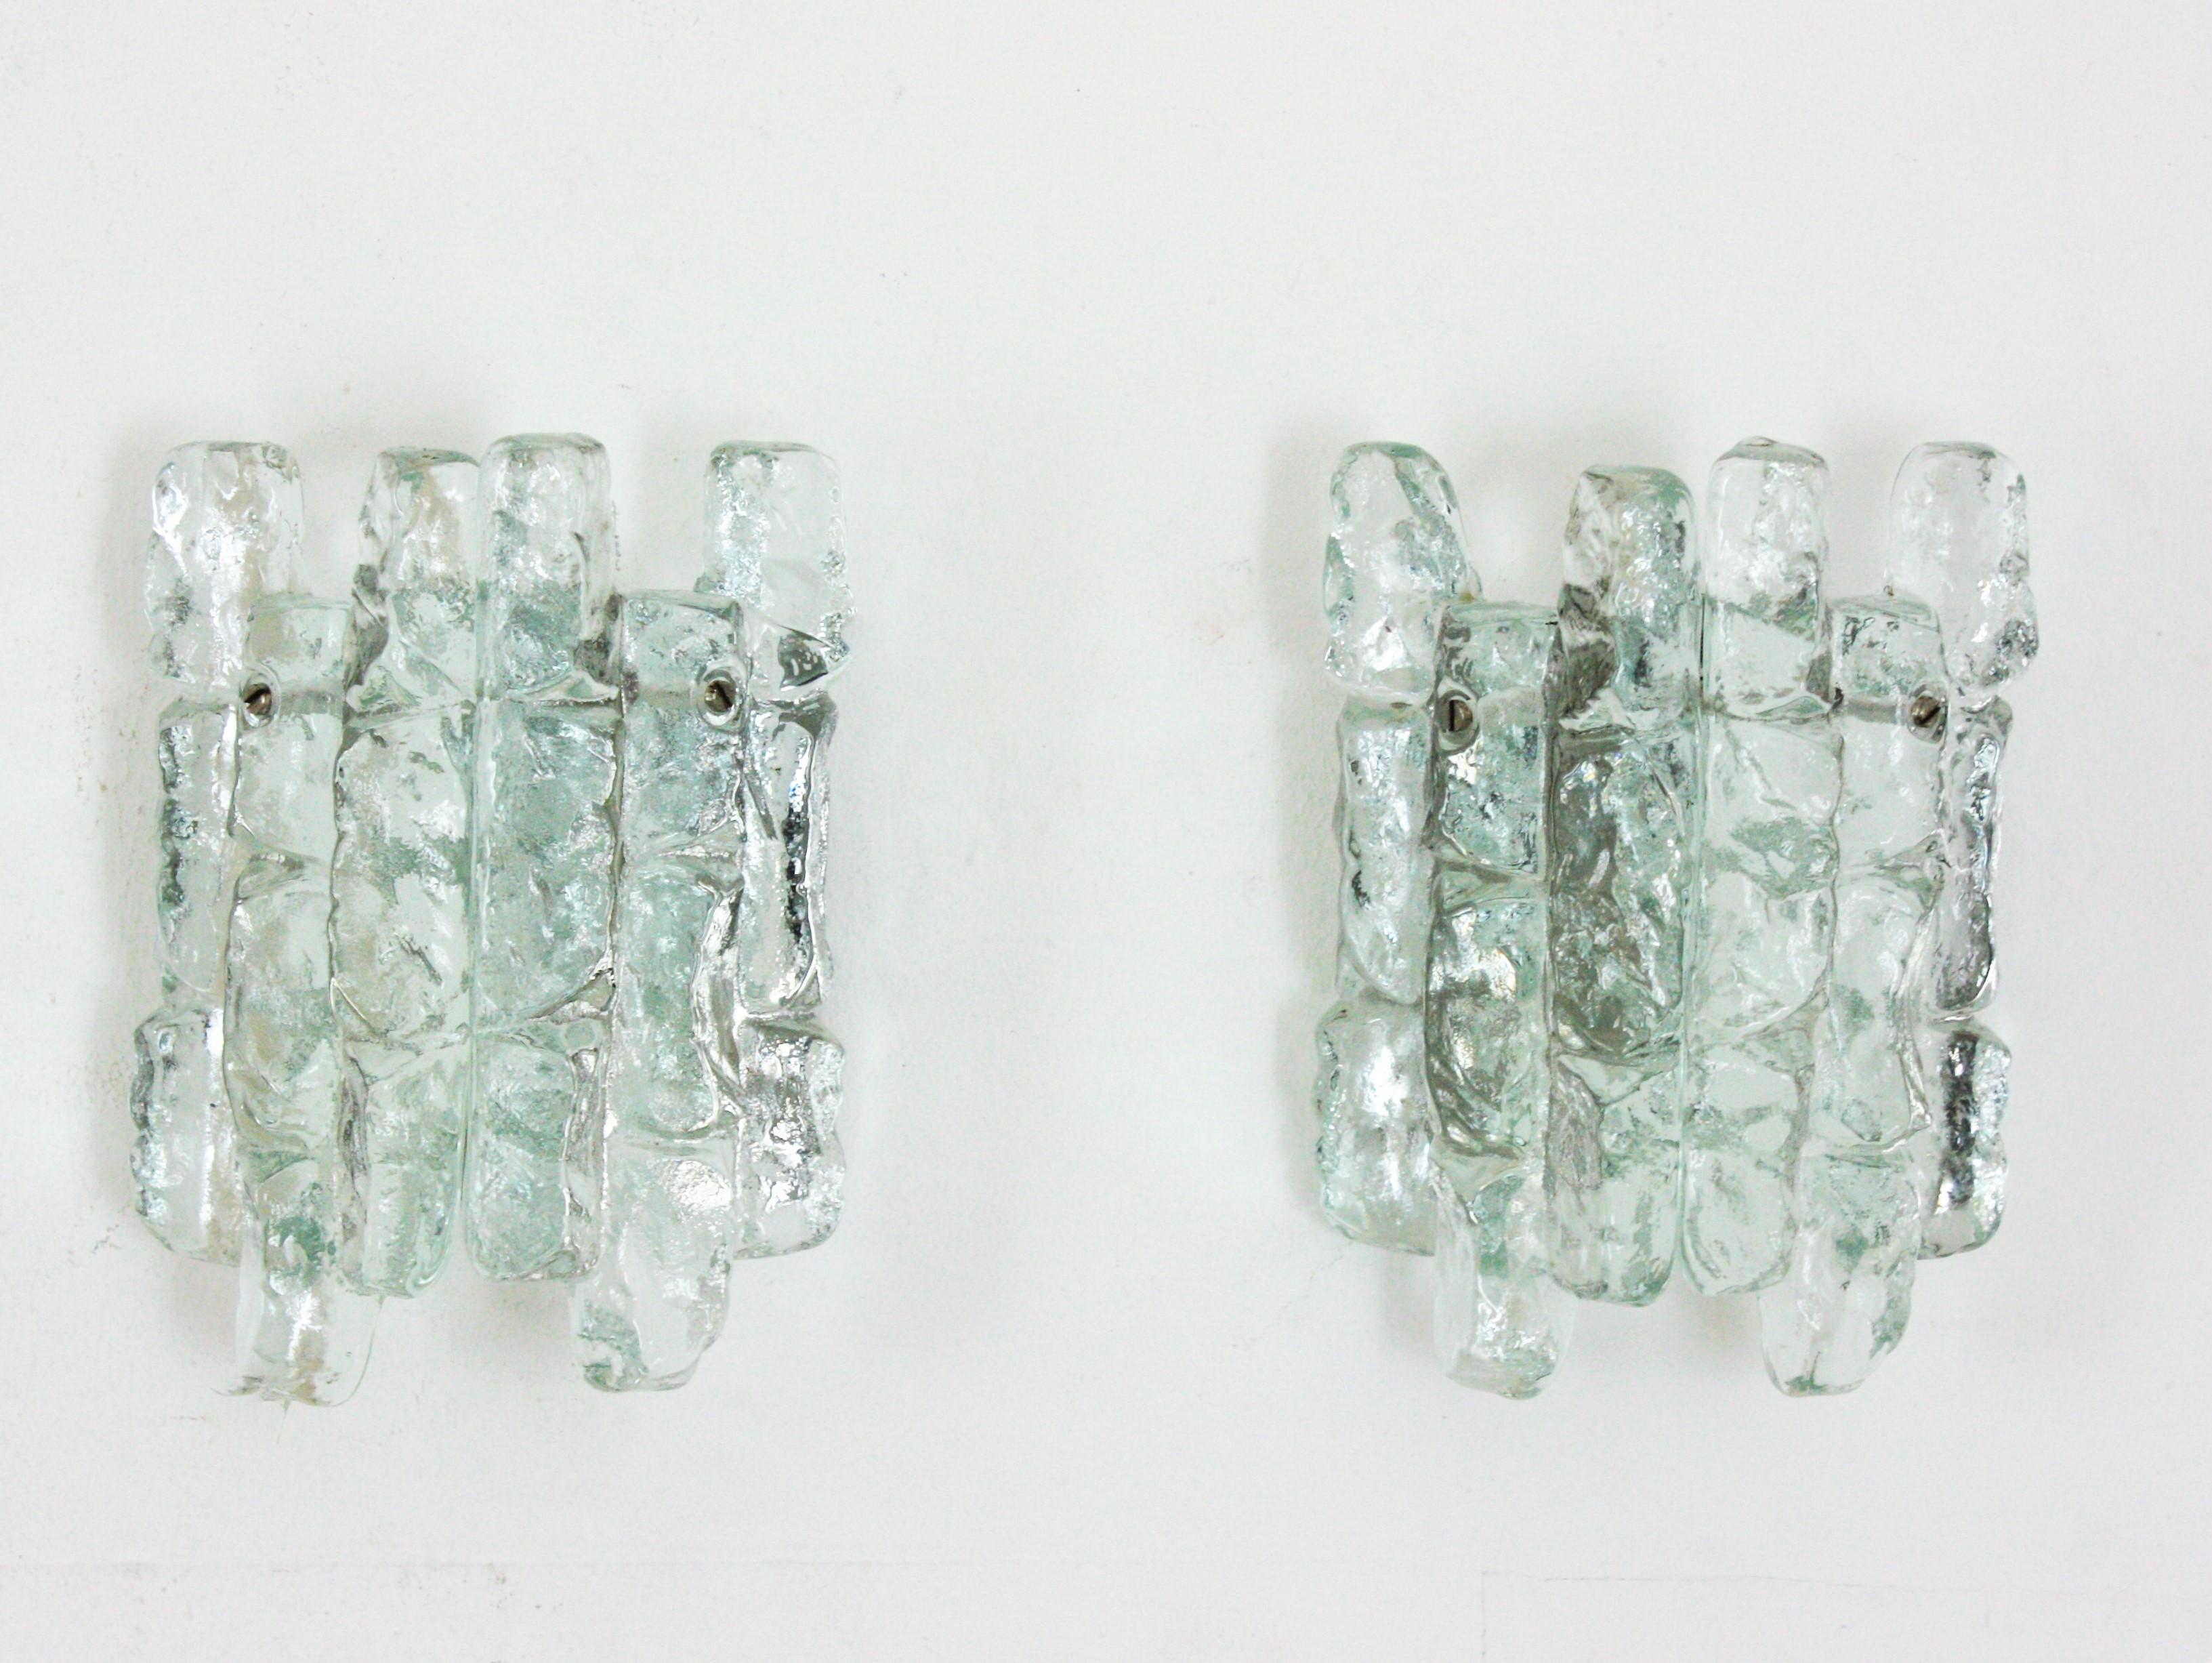 Pair of ice glass Kalmar wall sconces. Each one is composed by two pieces of ice glass blocks placed on a metal base.
This pair of sconces is in excellent condition and they have been new rewired,
Austria, 1960s.
Newly wired with 1 E14 bulb